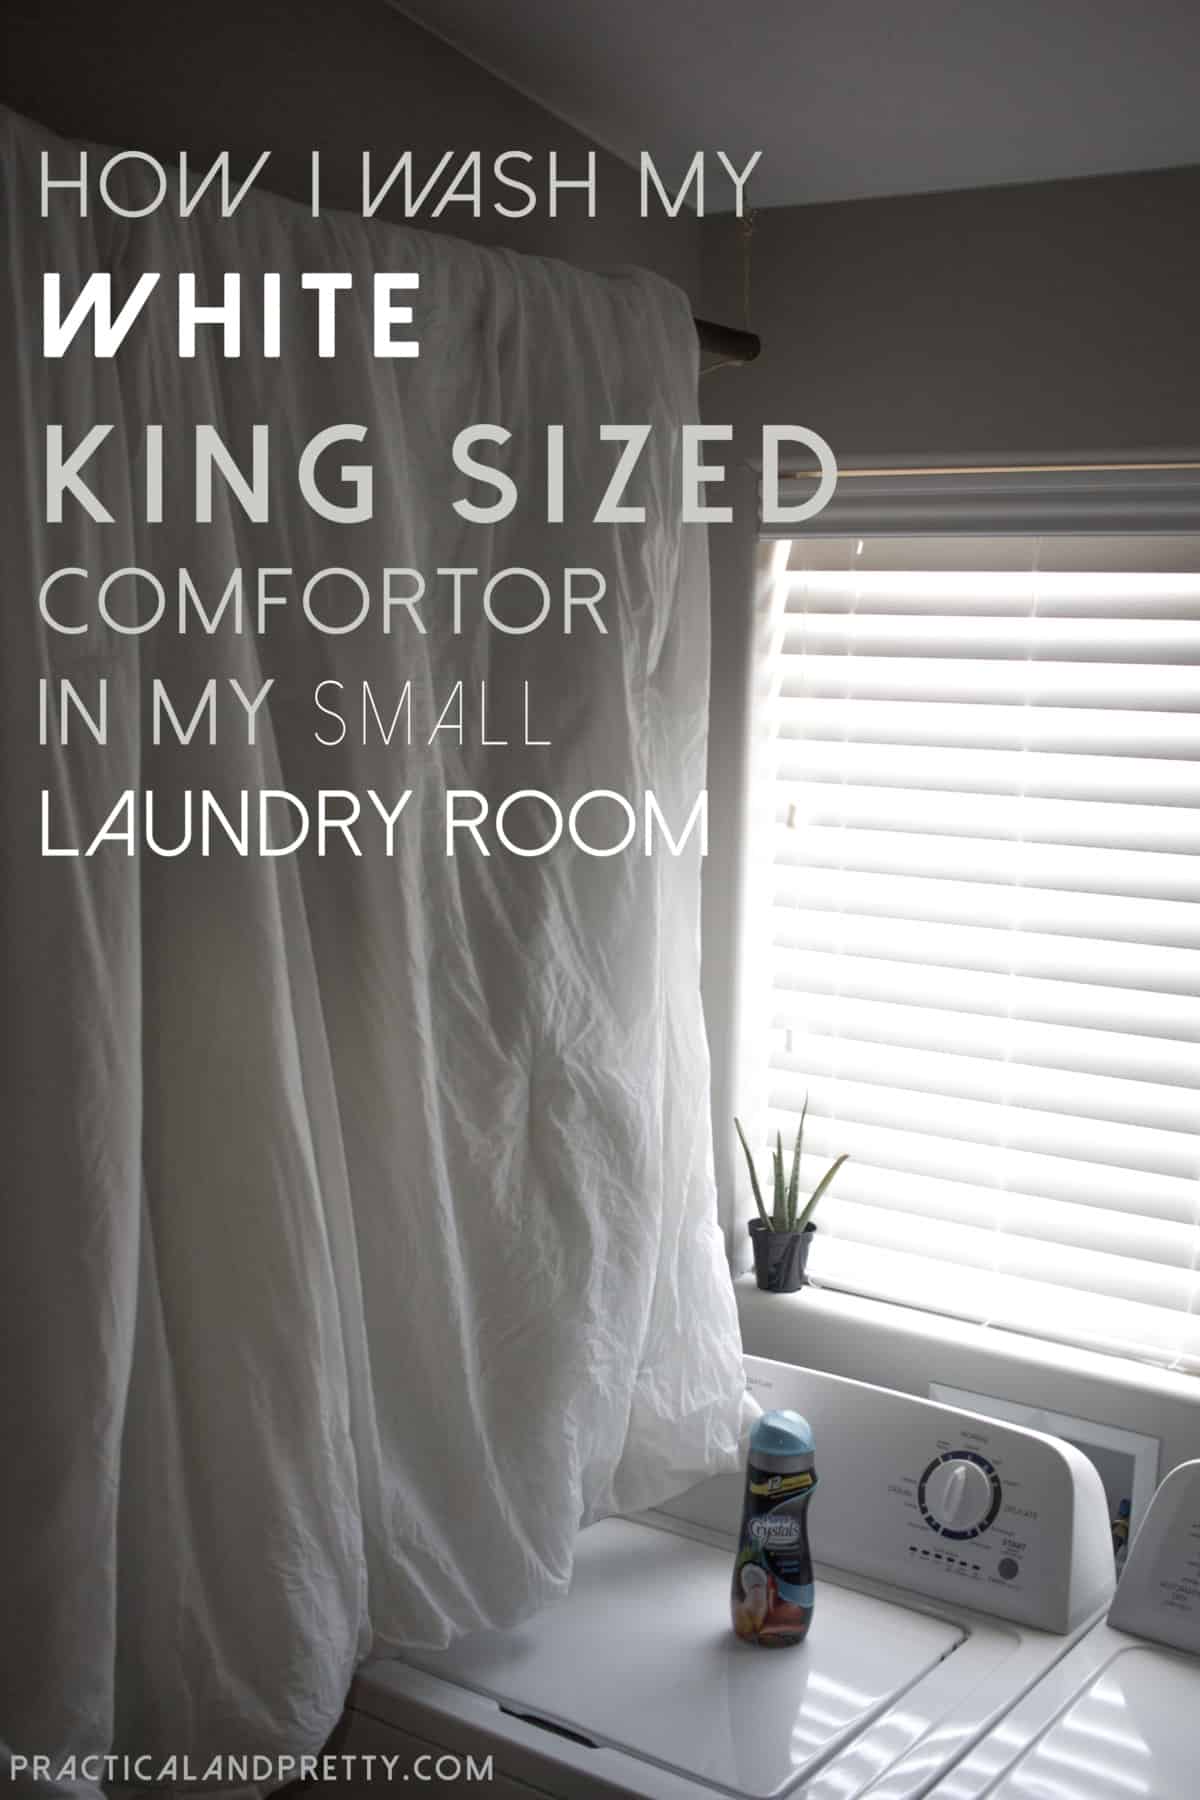 Washing a king sized comforter in a tiny laundry room can be hard, but I've got a super simple solution for you!